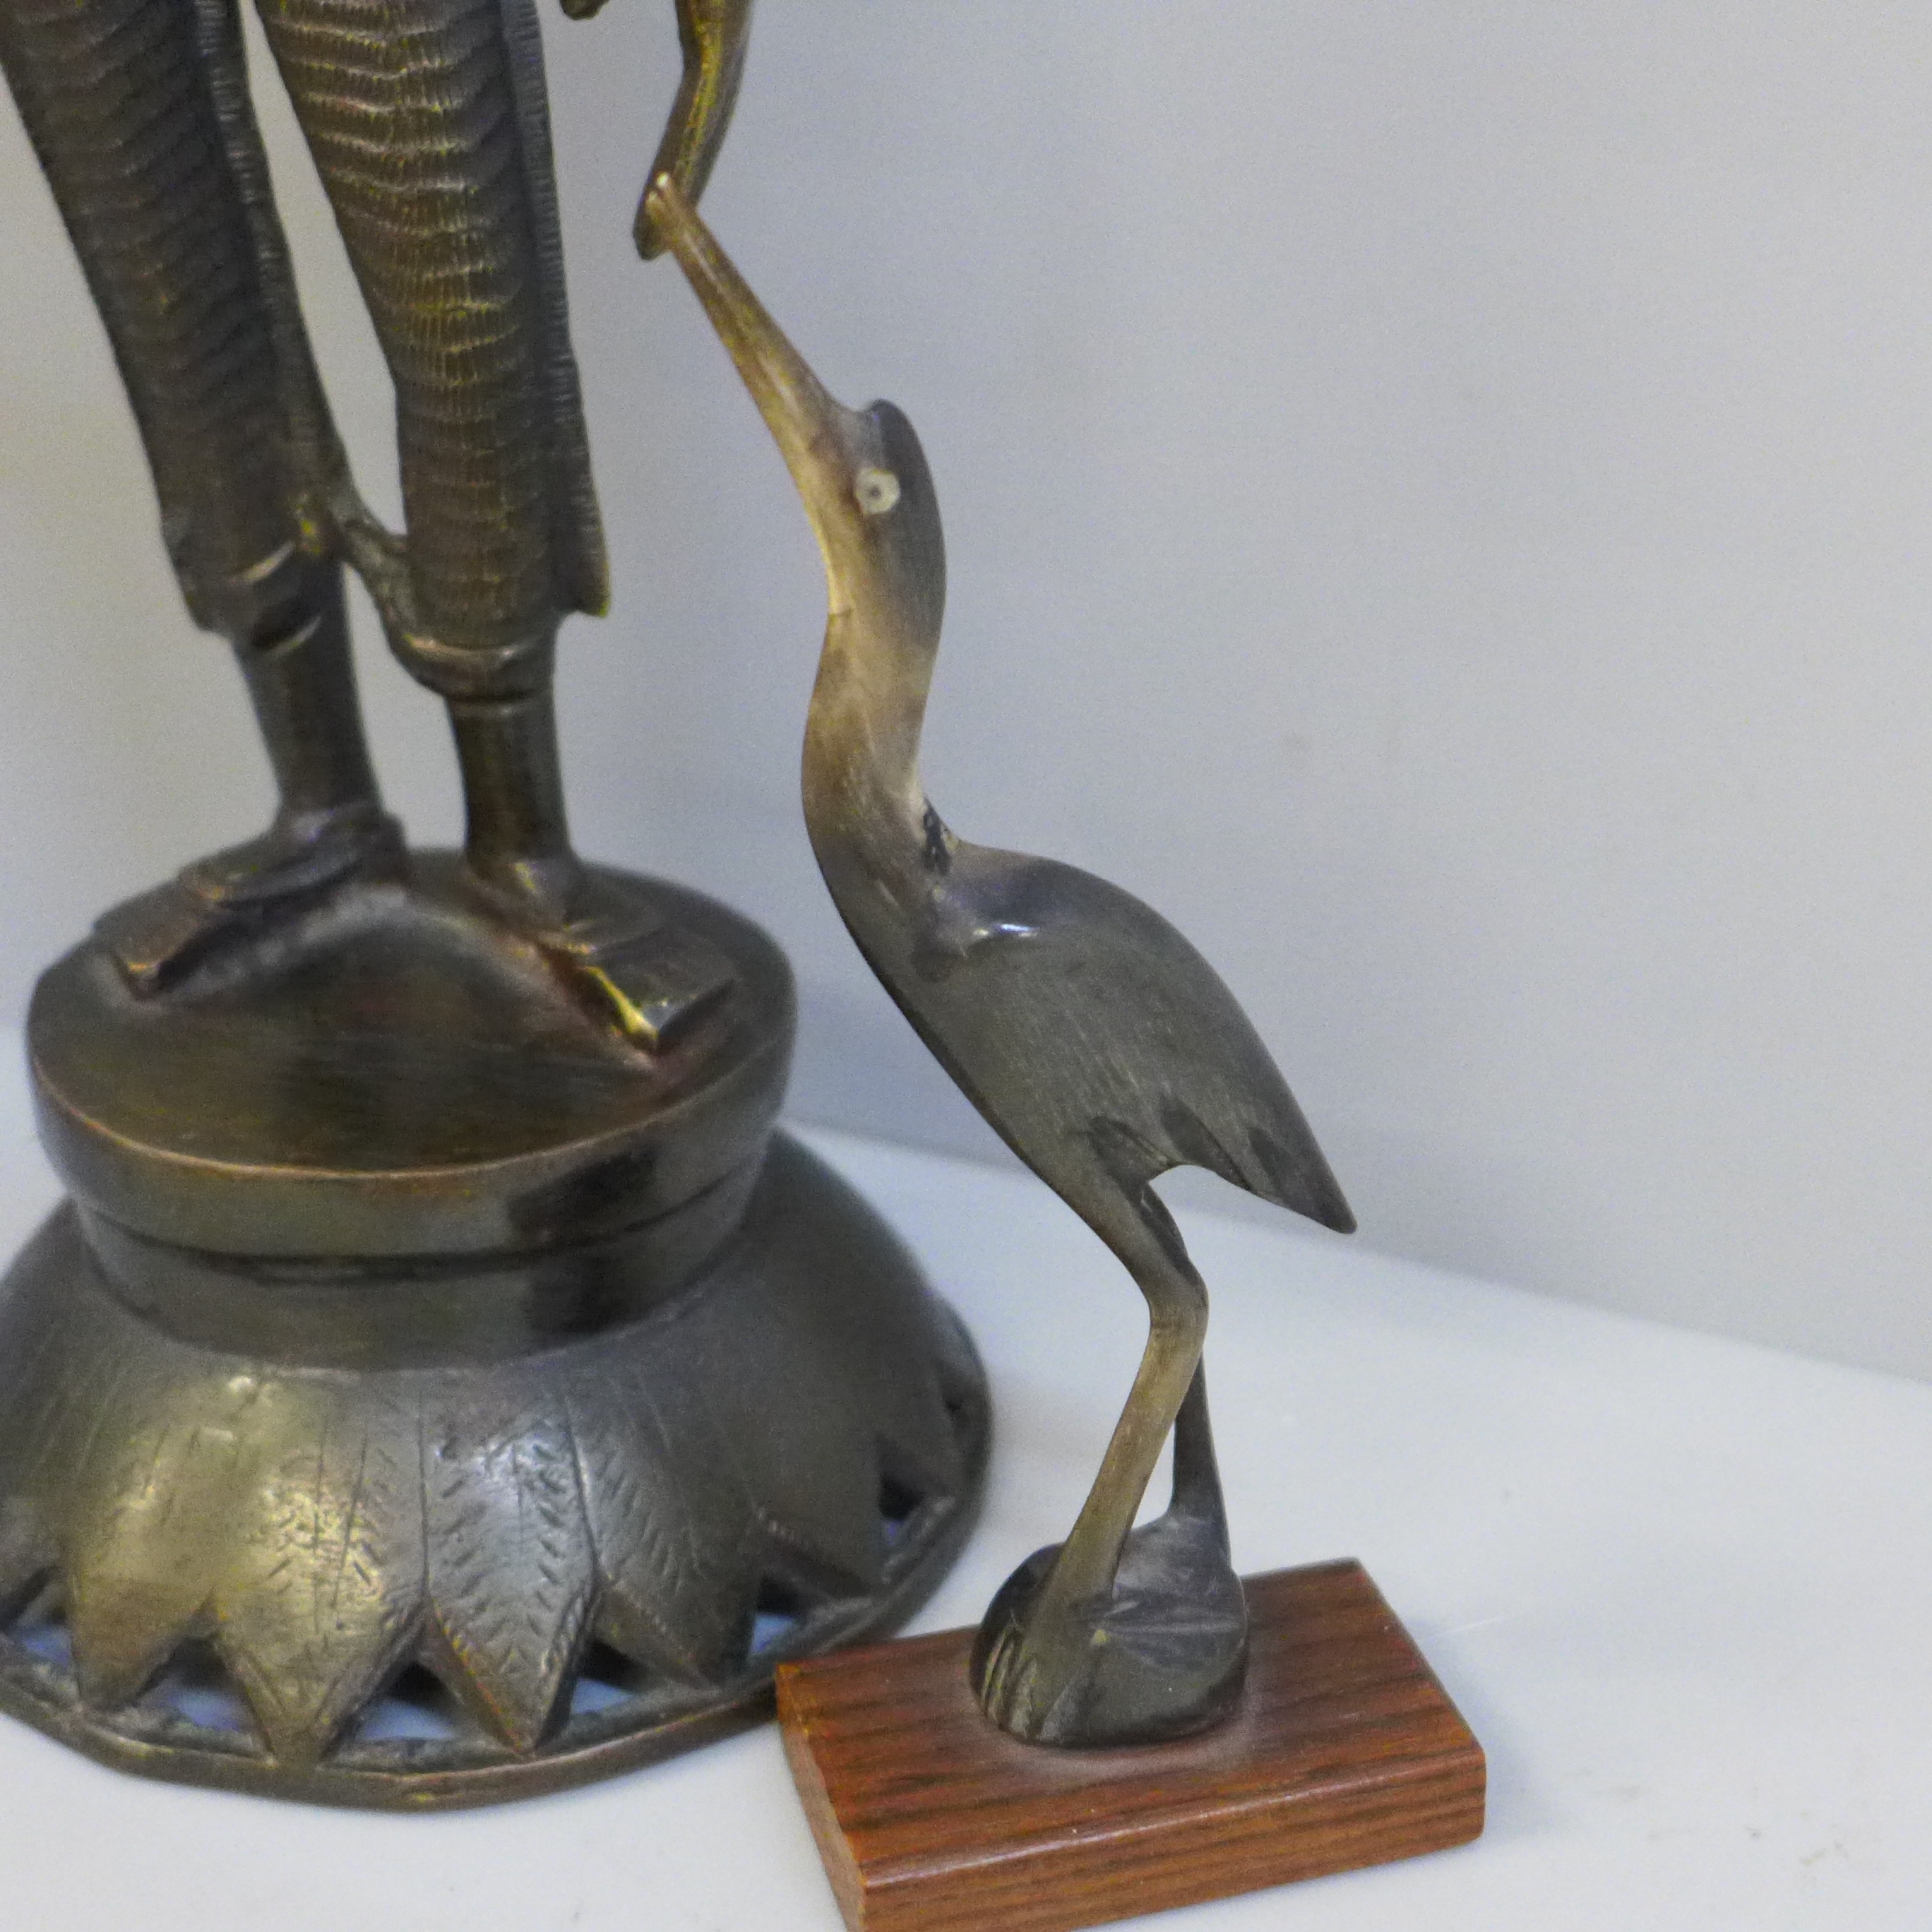 A bronze model of an Indian Goddess, Parvati Devi and a horn and rosewood model of a bird - Image 2 of 4